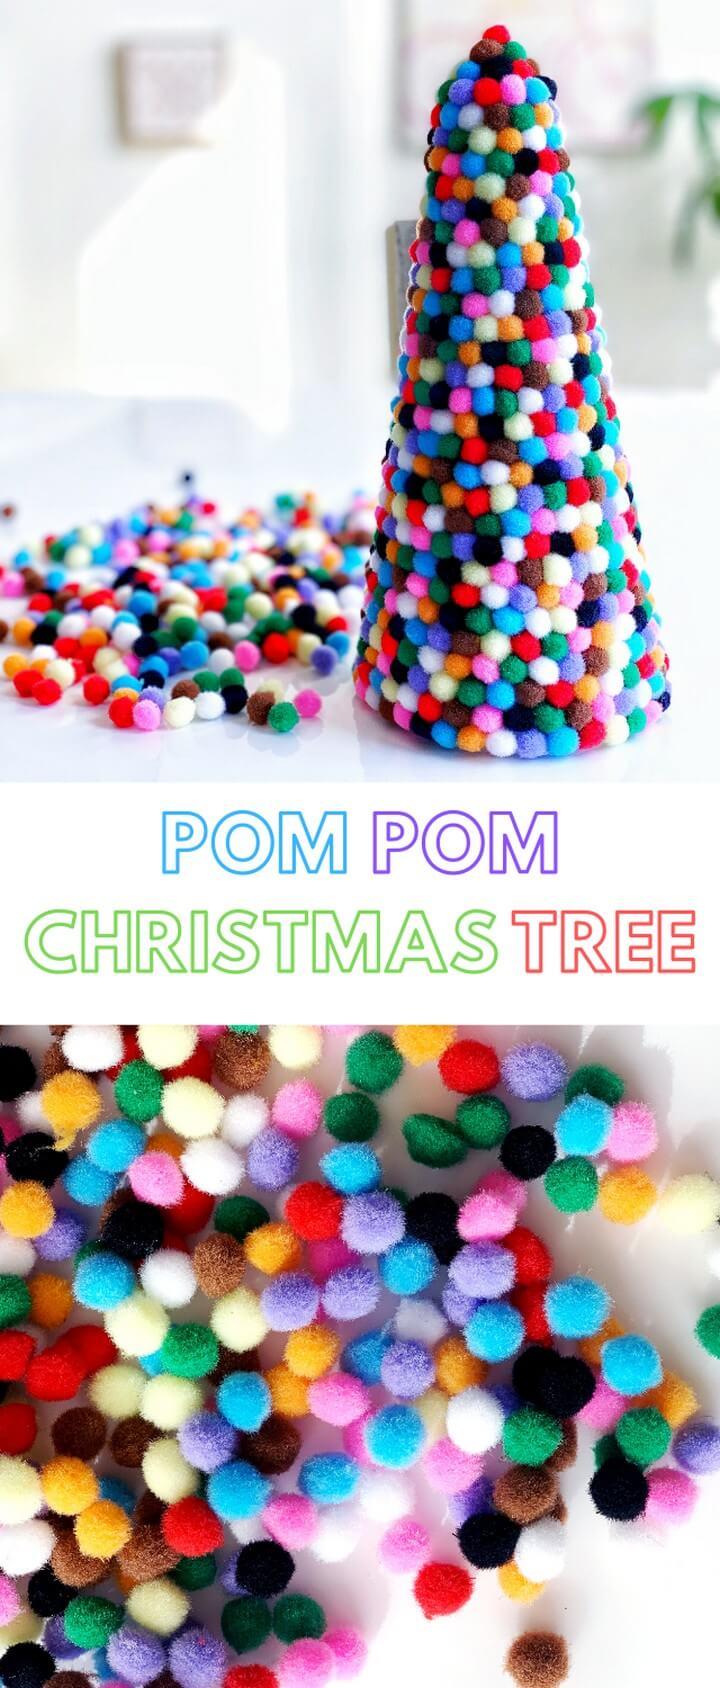 Easy Mini Pom Pom Christmas Tree DIY Craft, diy project, diy projects, diy project wood, diy project at home, diy project for home, diy projects for home, diy project home, diy projector screen, diy projects pallets, diy projector, diy project with pallets, diy projects for kids, diy projects easy, diy art project, diy project home decor, diy projects electronics, diy project to sell, diy outdoor project, diy project for christmas, diy backyard project, diy projects for teens, diy projector screen frame, diy project ideas for homes, diy projector stand, diy project garden, diy project youtube, diy project ideas, diy projects electrical, diy project for couples, diy projects engineering, diy projector screen stand, diy project arduino, what is diy project, diy projector for laptop, diy project raspberry pi, diy kitchen project, diy project with wine bottles, diy project for school, diy projects for school, diy project box, diy soldering project kits, diy project kits, diy project book, diy project decoration, diy project plans, diy project kits for guys, diy guitar project, diy project gifts, diy project table, diy project app, diy volcano project, diy knitting project bag, diy craft and project, diy project for boyfriend, diy project websites, diy project videos, diy project for girlfriend, diy project bag, diy project enclosure, diy project planner, diy drone project, diy projects easy and cheap, diy project design, diy project.com, diy project list, diy project life, diy project stack, diy project case, diy project box enclosure, diy projects jewelry holder, diy project board, diy project mc2 gadgets, diy project ideas to sell, diy project life cards, diy project plans free, diy project management, diy project ideas for school, diy project supplies, diy project based learning for math and science, diy razer project valerie, diy project image on wall, diy project design software, diy garden project ideas, the diy project, diy project stack shimmer noel village, diy project calculator for dummies, diy project calculator, diy project blog, diy project ideas for guys, diy art project ideas, diy project milwaukee m18 battery adapter, diy project 18v bosch battery adapter, diy project kits for adults, is laurdiy in project mc square, your diy project supplies, diy project ideas electronics, diy atom project, diy glacier project, diy project for students, diy project valerie, projet 45 diy skatepark, diy upcycle project, diy project with pete, diy project tools, diy project mc2 stuff, diy ziggurat project, diy project pinterest, diy 3d project, 100 diy project ideas from metal things, diy project proposal, diy project adalah, diy project technology, diy zipline project, diy 4th of july project, diy project openhab, diy project old coffee table, diy project file decoration, diy for project, diy project file cover, diy project cost calculator, your diy project ventures, diy project with plastic bottles, diy projects examples, how to make diy project, ammo can diy project, diy jewelry project, diy project jeans, diy project border design, diy science project volcano, diy project help, diy oak project, diy kitchen project ideas, diy project raised bed, diy project definition, diy project using plastic bottles, diy project amplifier, tools for diy project, diy project design app, diy project kitchen island, diy project runway, diy club project 1, diy kpop project, how to diy project, diy project backdrop stand under $15, diy project like, diy thank you project, diy project means, diy project cost estimator, diy yearbook project, diy project home depot, diy project with arduino, diy project fails, diy project tracker, diy project to make and sell, diy project hacks, diy project to do at home, diy project classes near me, diy project pdf, is vinyl siding a diy project, diy dac project, diy project vintage, diy projects electronics for students, diy zoo project, theme for diy project, diy project 2019, diy project amazing, diy project linda, diy-project-recycled-upside-down-planters, what does diy project mean, tonefiend diy project 1, is siding a diy project, 12 diy project with iron, diy project shop, diy 2x4 project, diy project cover, diy project on pinterest, is laminate flooring a diy project, is replacing windows a diy project, diy project living room, diy project with old doors, life is a diy project, diy project classes, tonefiend diy club project 1, diy project organizer, is stamped concrete a diy project, diy project house, diy oscilloscope project, diy project homestead, diy project template, diy project planning app, diy project que significa, diy project stack winter village, diy project rabbit hutch, diy project desk, diy project life filler cards, diy project hashtags, diy project ladybugs, diy project network, diy project ideas for making money, what diy project should i do quiz, diytomake.com